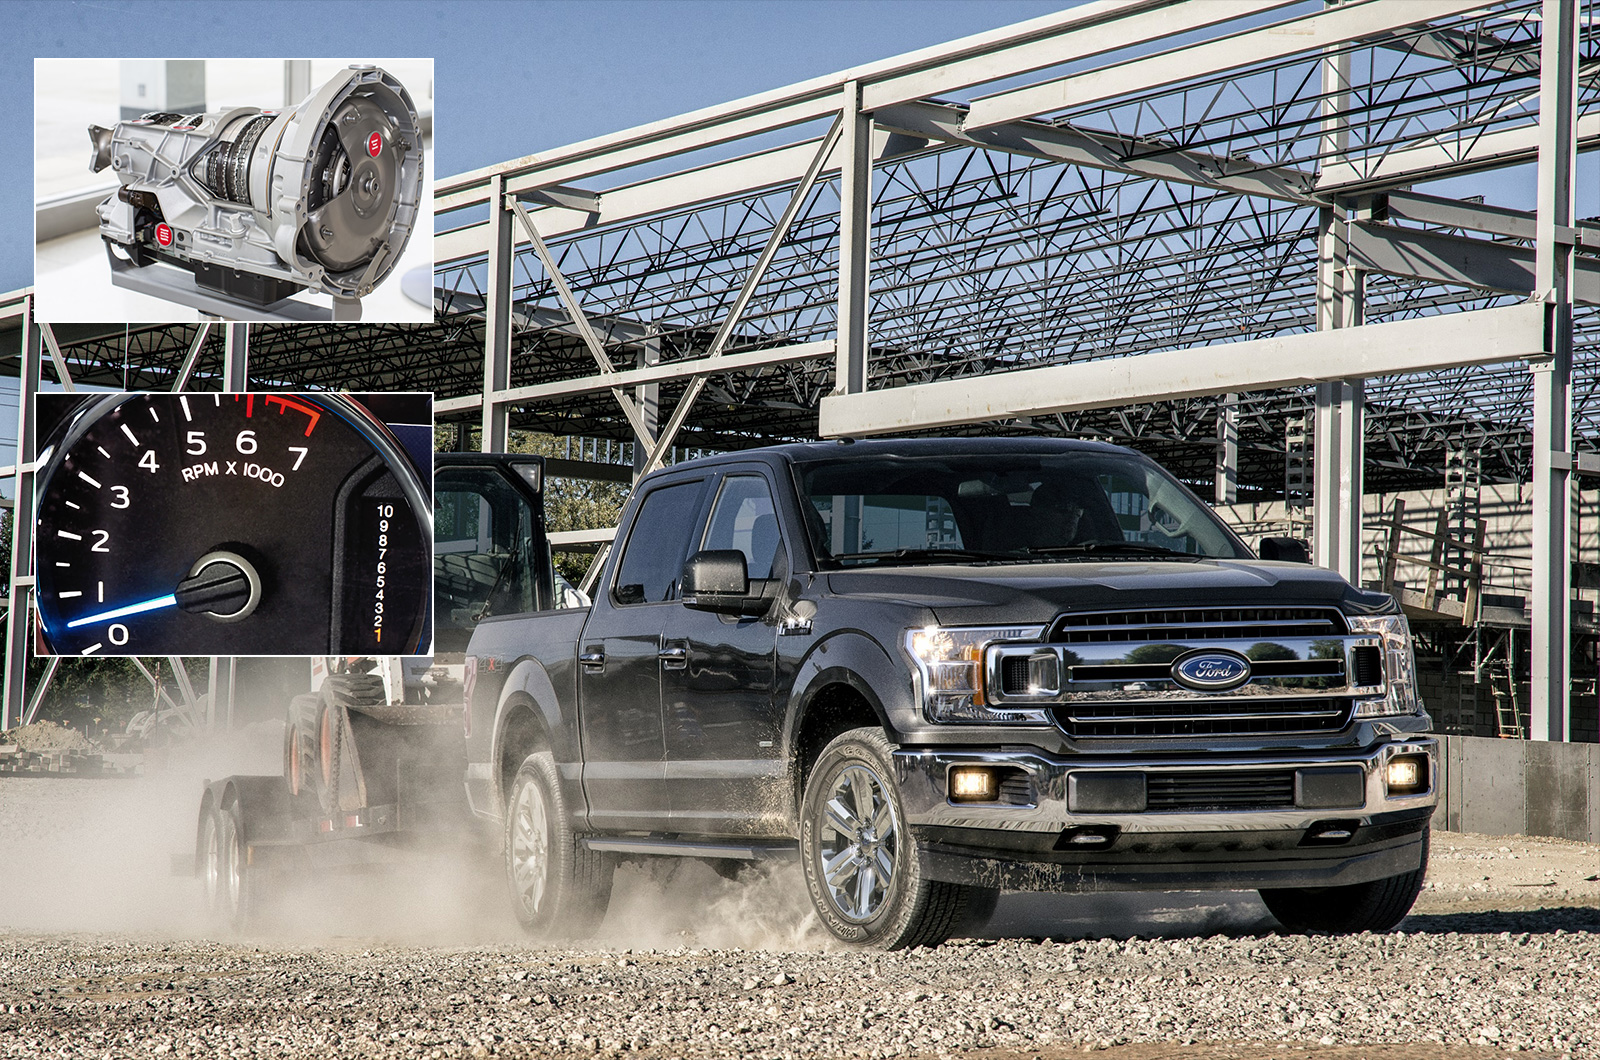 <p>The term “10-speed” isn’t just for road bikes anymore. GM and Ford formed an unlikely alliance to design the first 10-speed automatic transmission and began producing it in 2017. Ford first brought it to the market in the 2017 <strong>F-150</strong>; GM chose to first use it in the 2017 <strong>Chevrolet Camaro ZL1</strong>.</p><p>As of 2021 it’s also found in a number of other cars including the Fords <strong>Mustang</strong>, <strong>Expedition</strong>, <strong>Everest</strong>, and <strong>Ranger </strong>models, and the <strong>Lincoln Navigator </strong>as well. On the GM side you can now find it in the <strong>Cadillacs Escalade </strong>and <strong>CT6</strong>, and Chevrolets <strong>Suburban RST</strong>, <strong>Tahoe</strong>, <strong>Camaro SS</strong>, and <strong>Silverado</strong>, and the <strong>GMC Yukon Denali</strong>. Meanwhile, Honda introduced its own 10-speed automatic transmission on the 2018 <strong>Odyssey</strong>.</p><p><strong>GROUNDBREAKER SCORE: 4 </strong>– very handy for economy.</p>